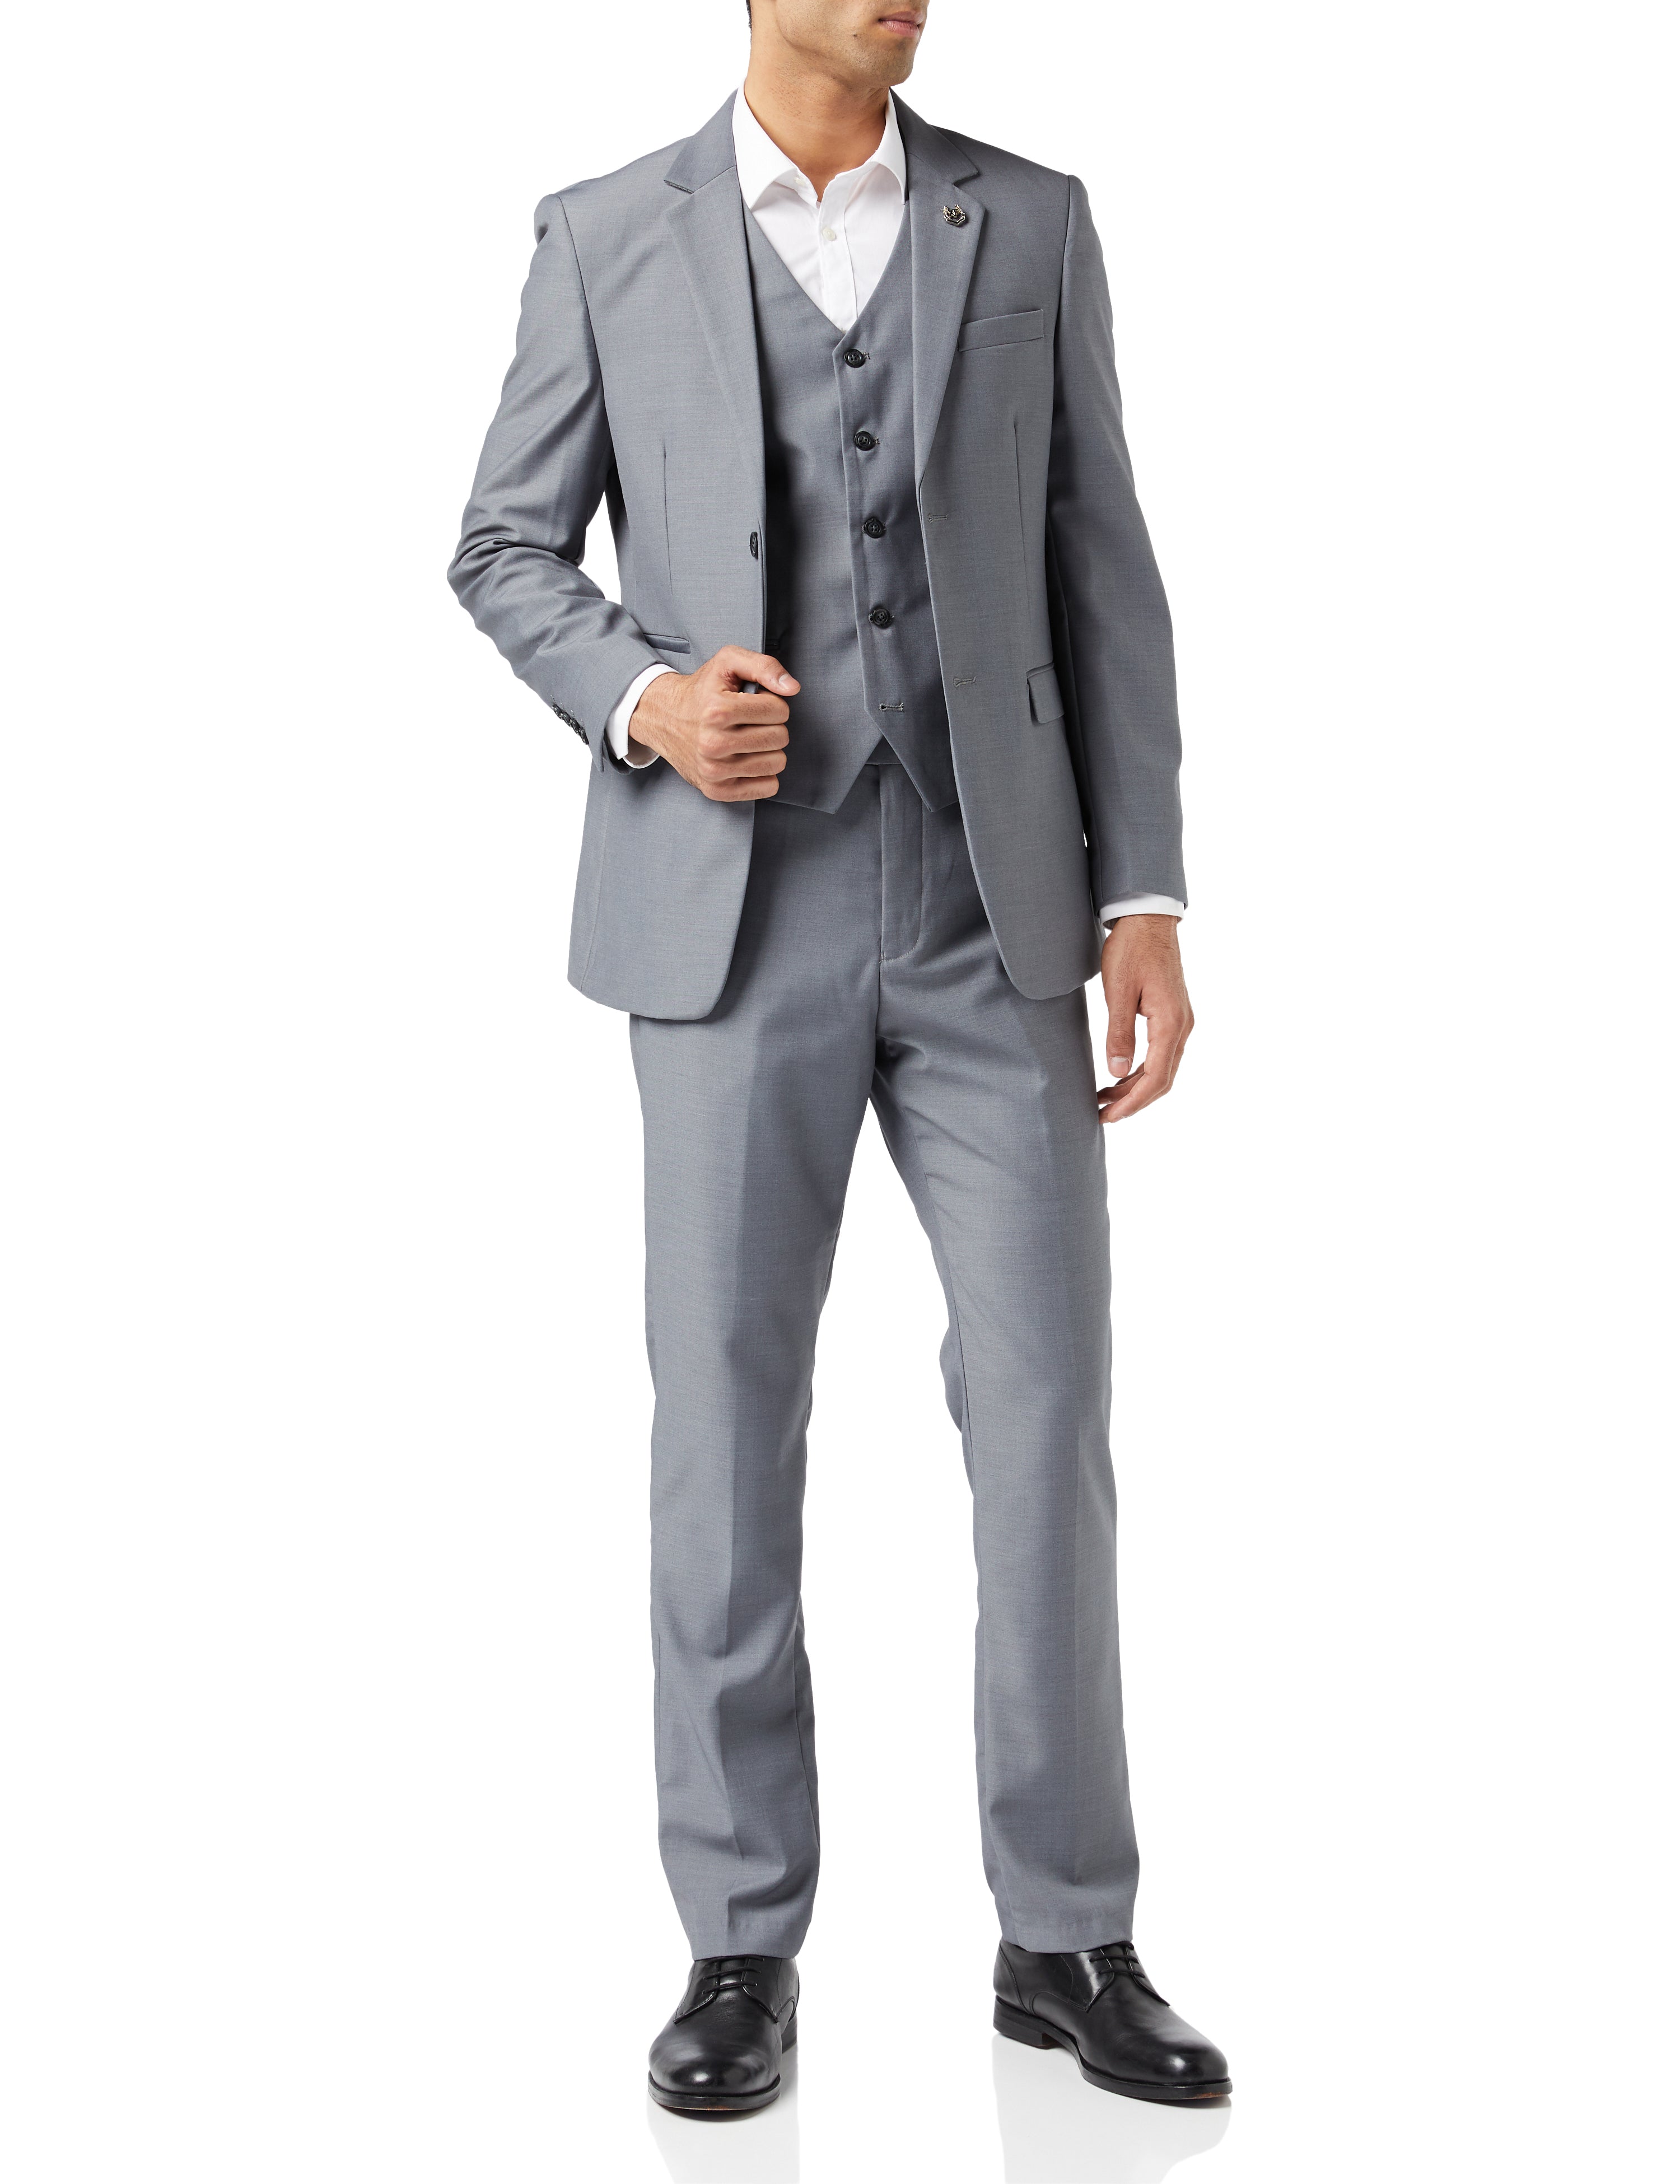 Mens Grey 3 Piece Business Suit Smart Casual Classic Tailored Fit Office